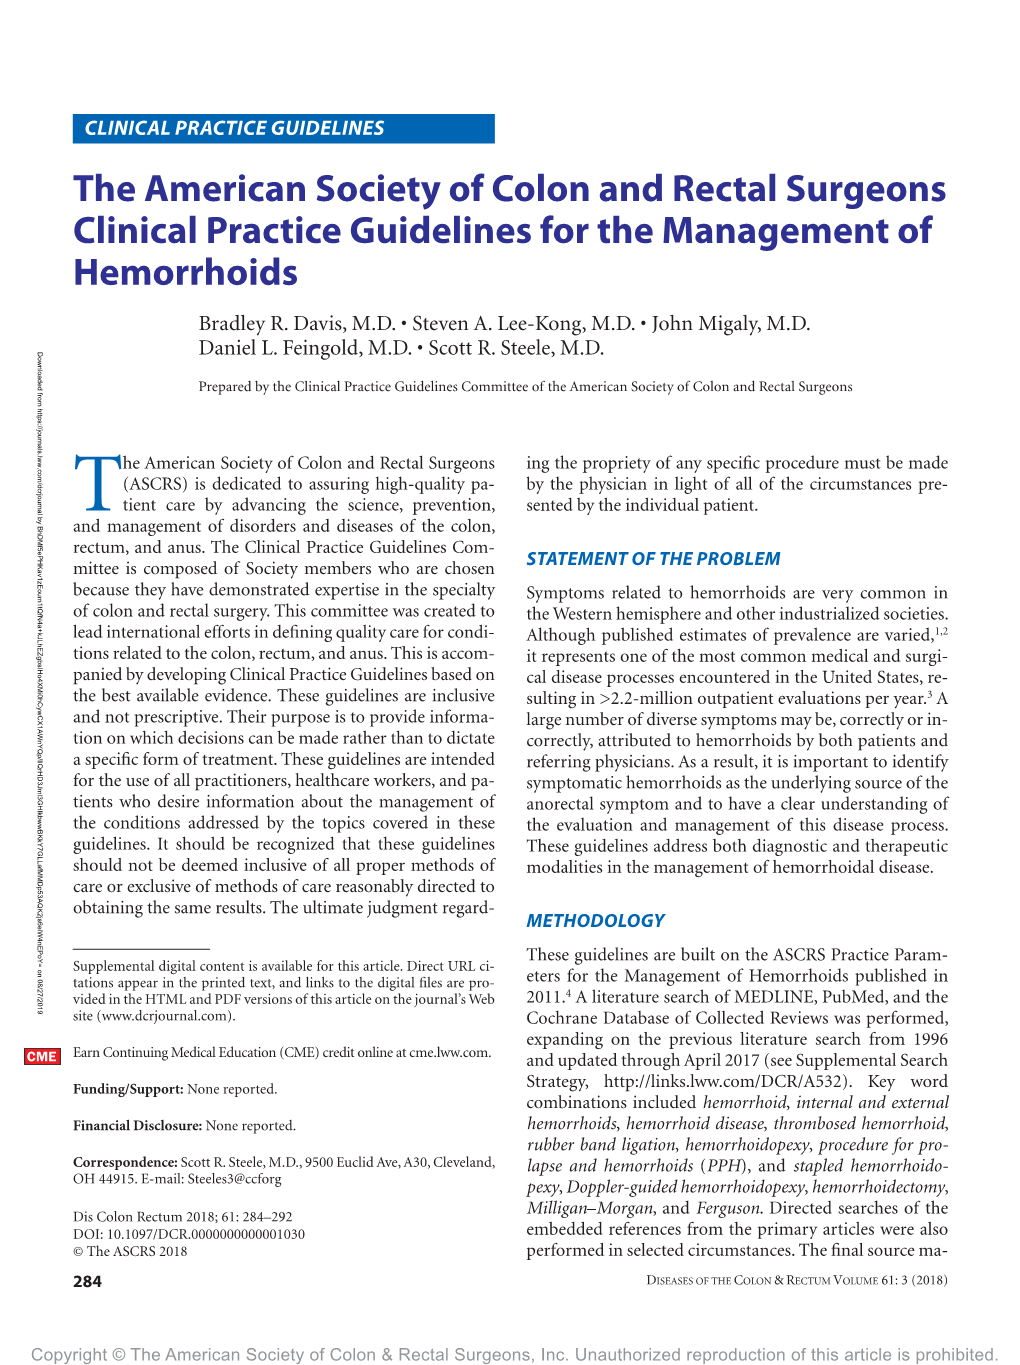 The American Society of Colon and Rectal Surgeons Clinical Practice Guidelines for the Management of Hemorrhoids